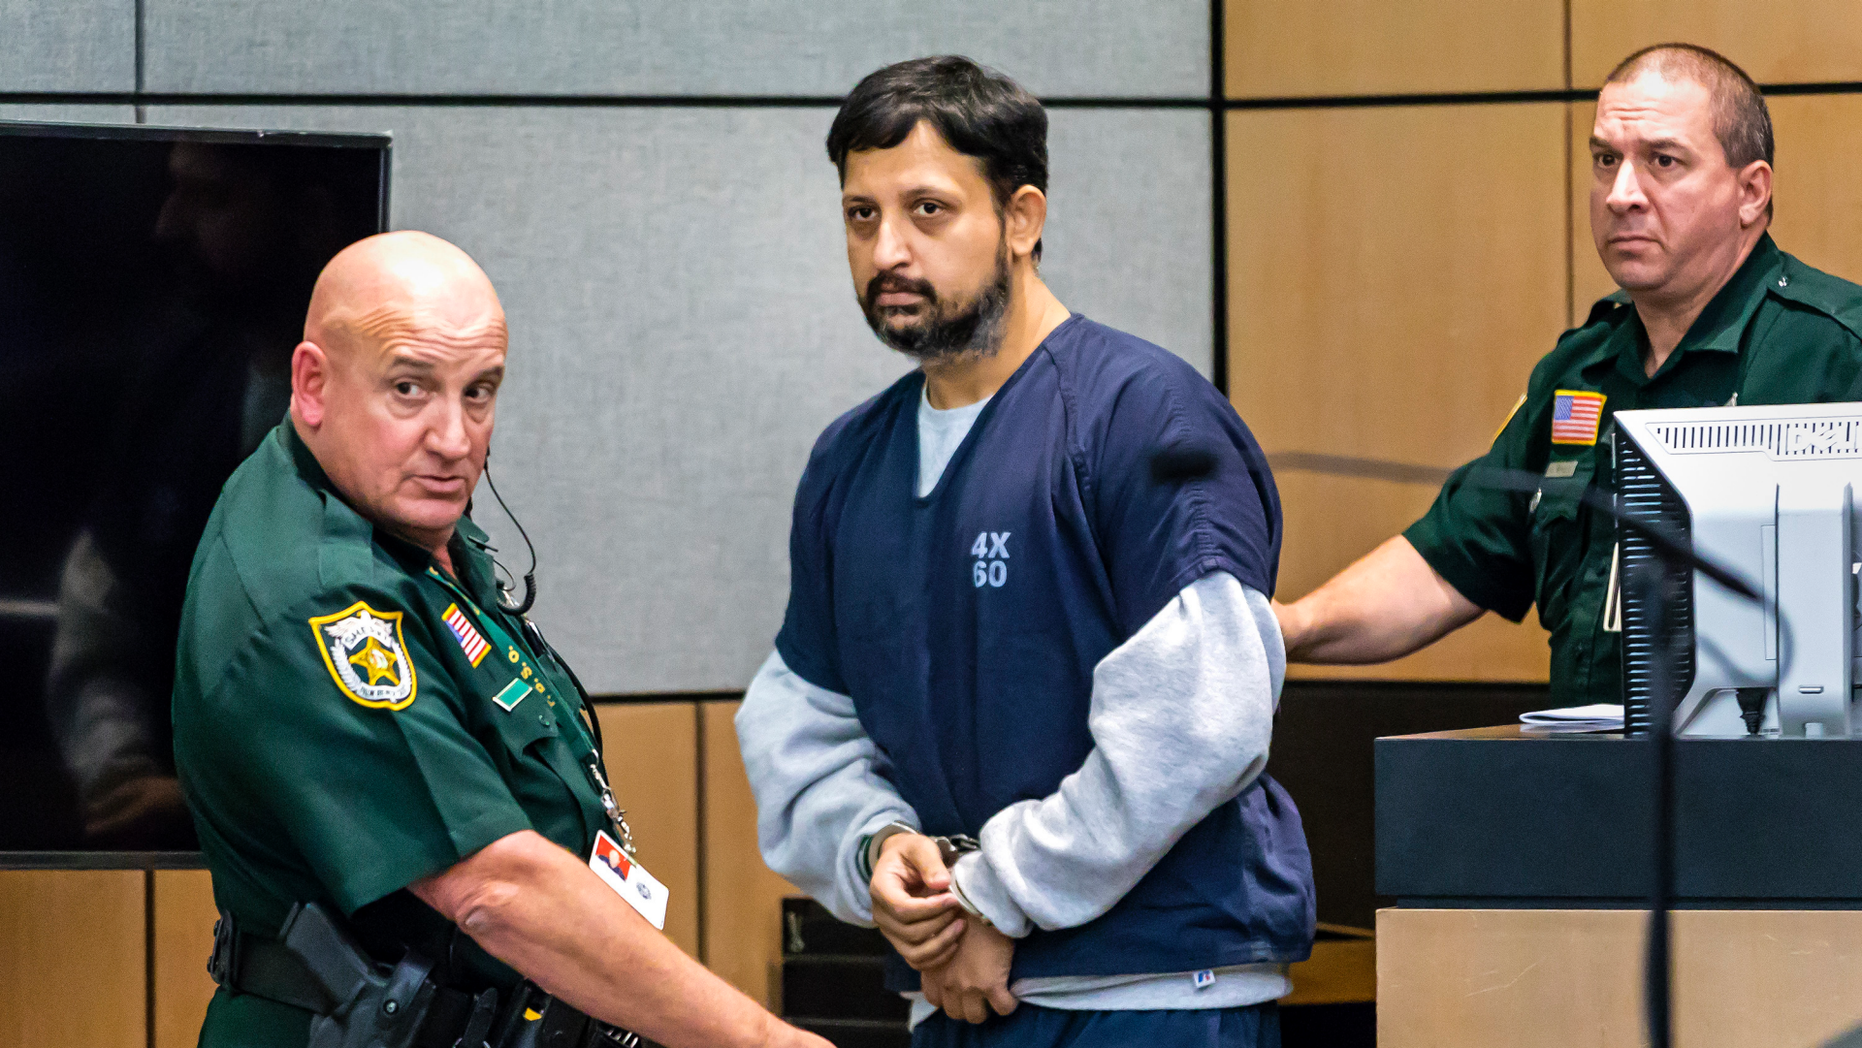 On Thursday, April 25, 2019, Nouman Raja was sentenced to West Palm Beach, Florida. Former police officer of Palm Beach Gardens, Raja was found guilty of a charge of manslaughter and attempted first degree murder. He shot dead a motorist, Corey Jones, on October 18, 2015. (Lannis Waters / Palm Beach Post via AP, Pool)